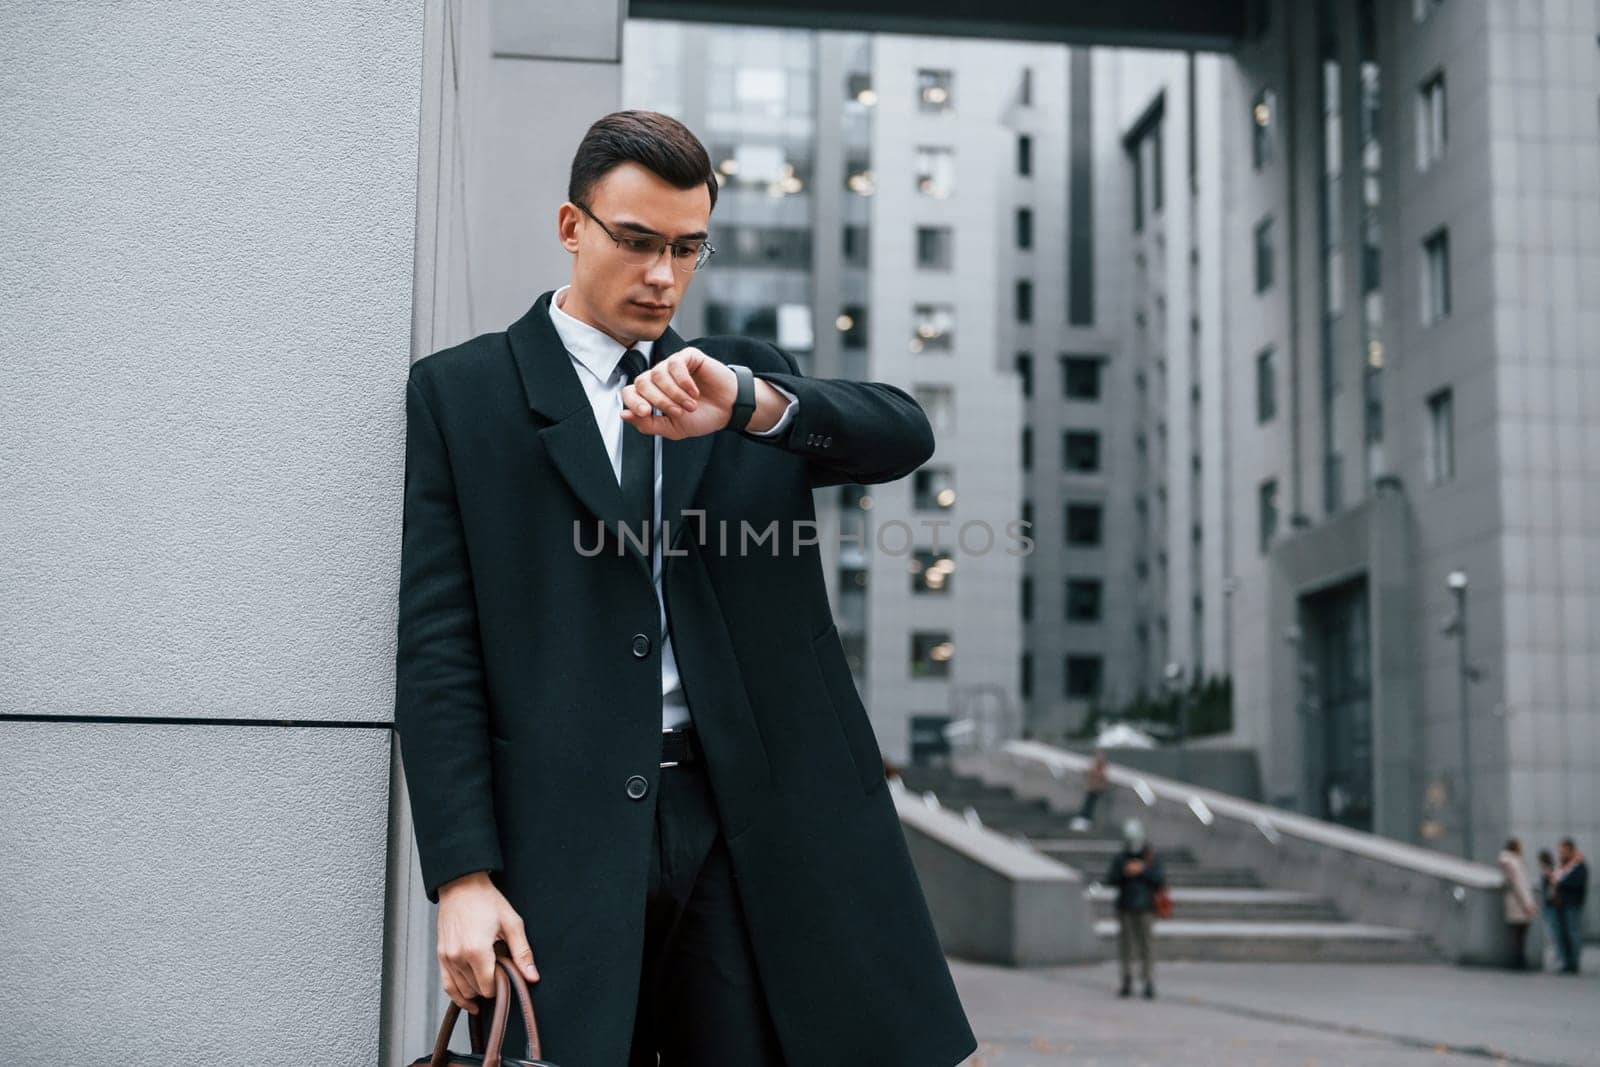 Standing near the building. Businessman in black suit and tie is outdoors in the city.